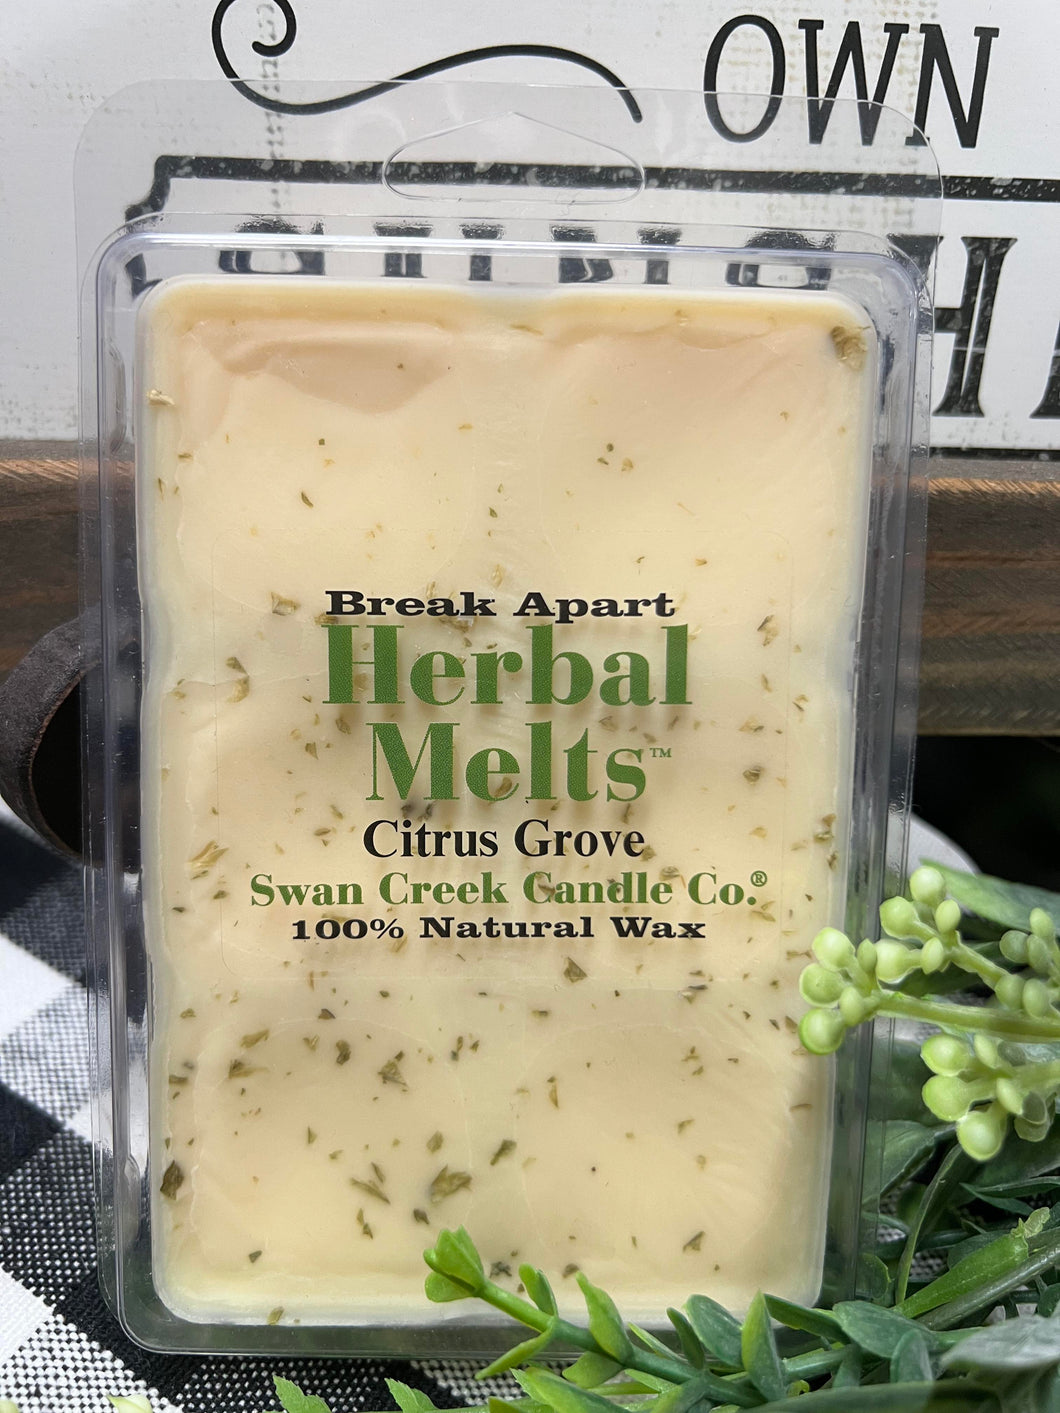 Swan Creek Candle Co. Citrus Grove Herbal Melts